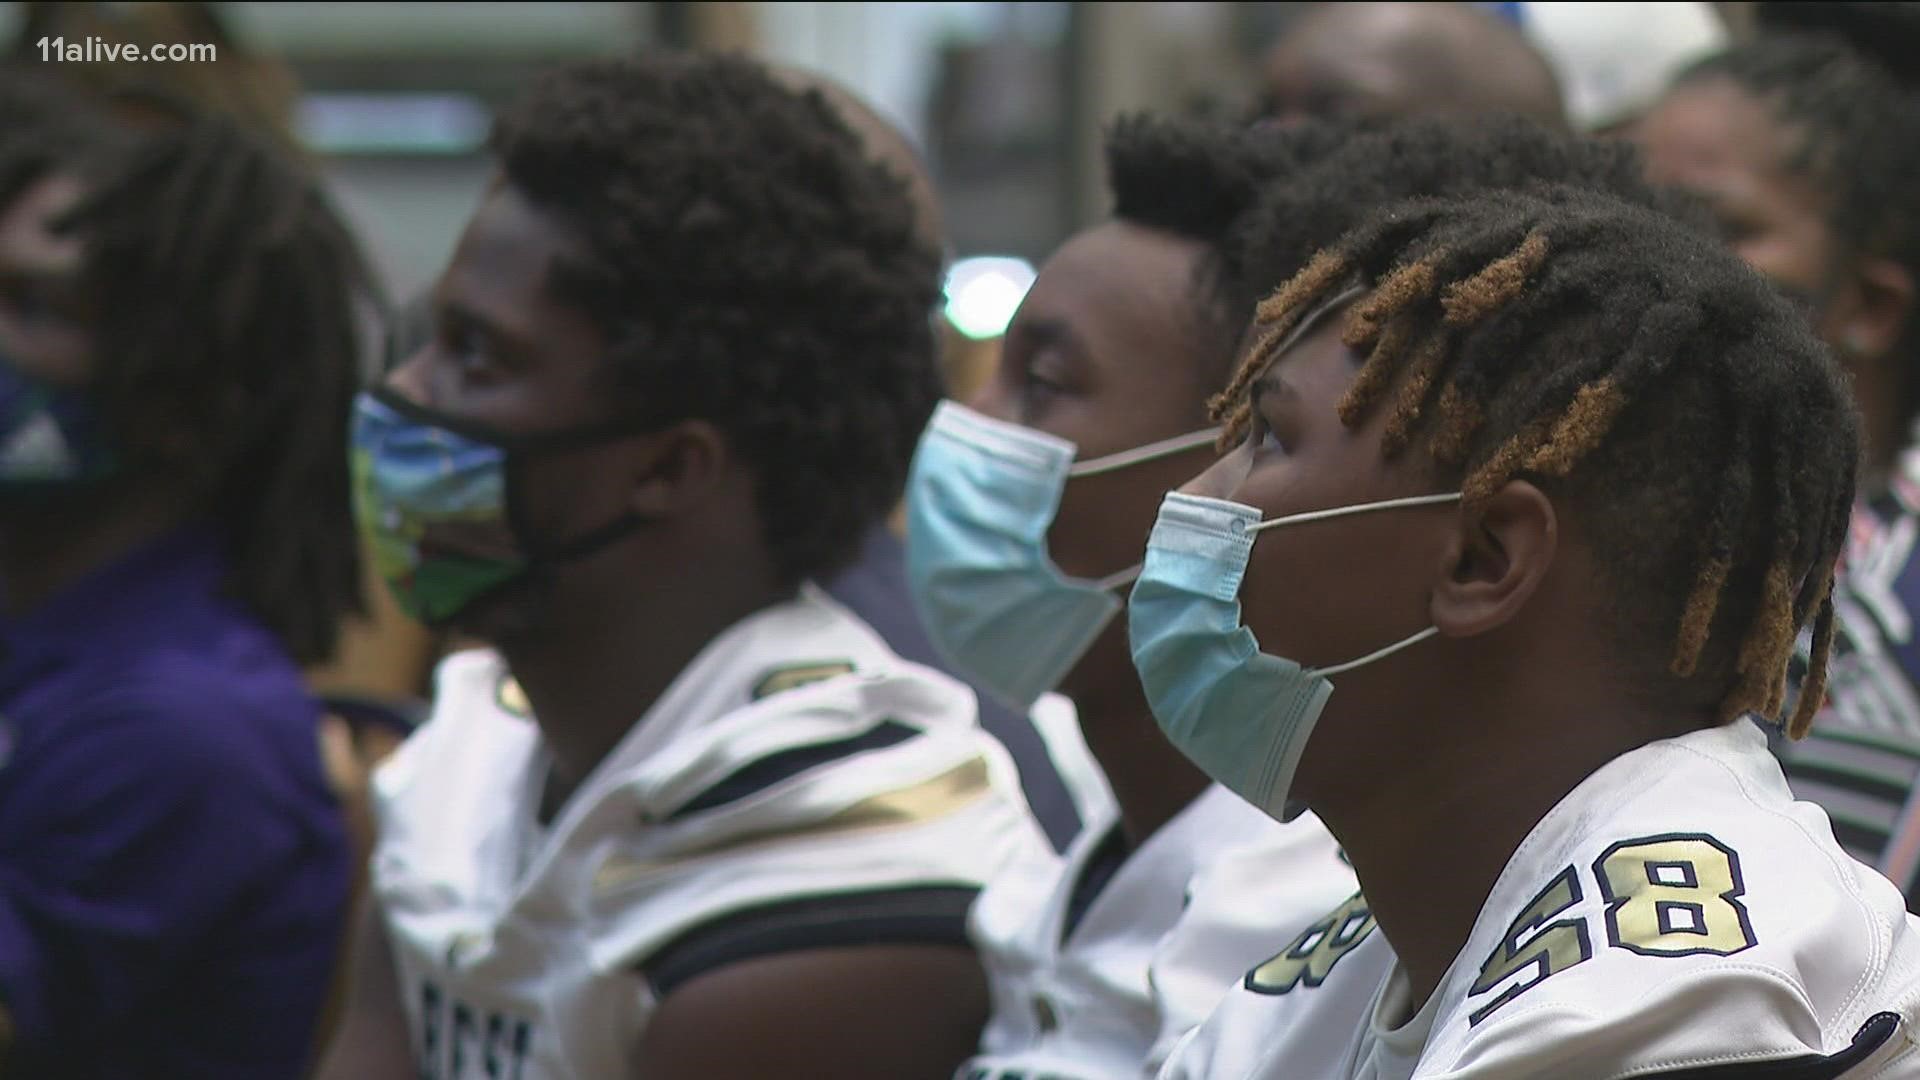 Athletic directors with Atlanta Public Schools and DeKalb County Schools spoke with 11Alive about the impact and adjustments due to the pandemic.